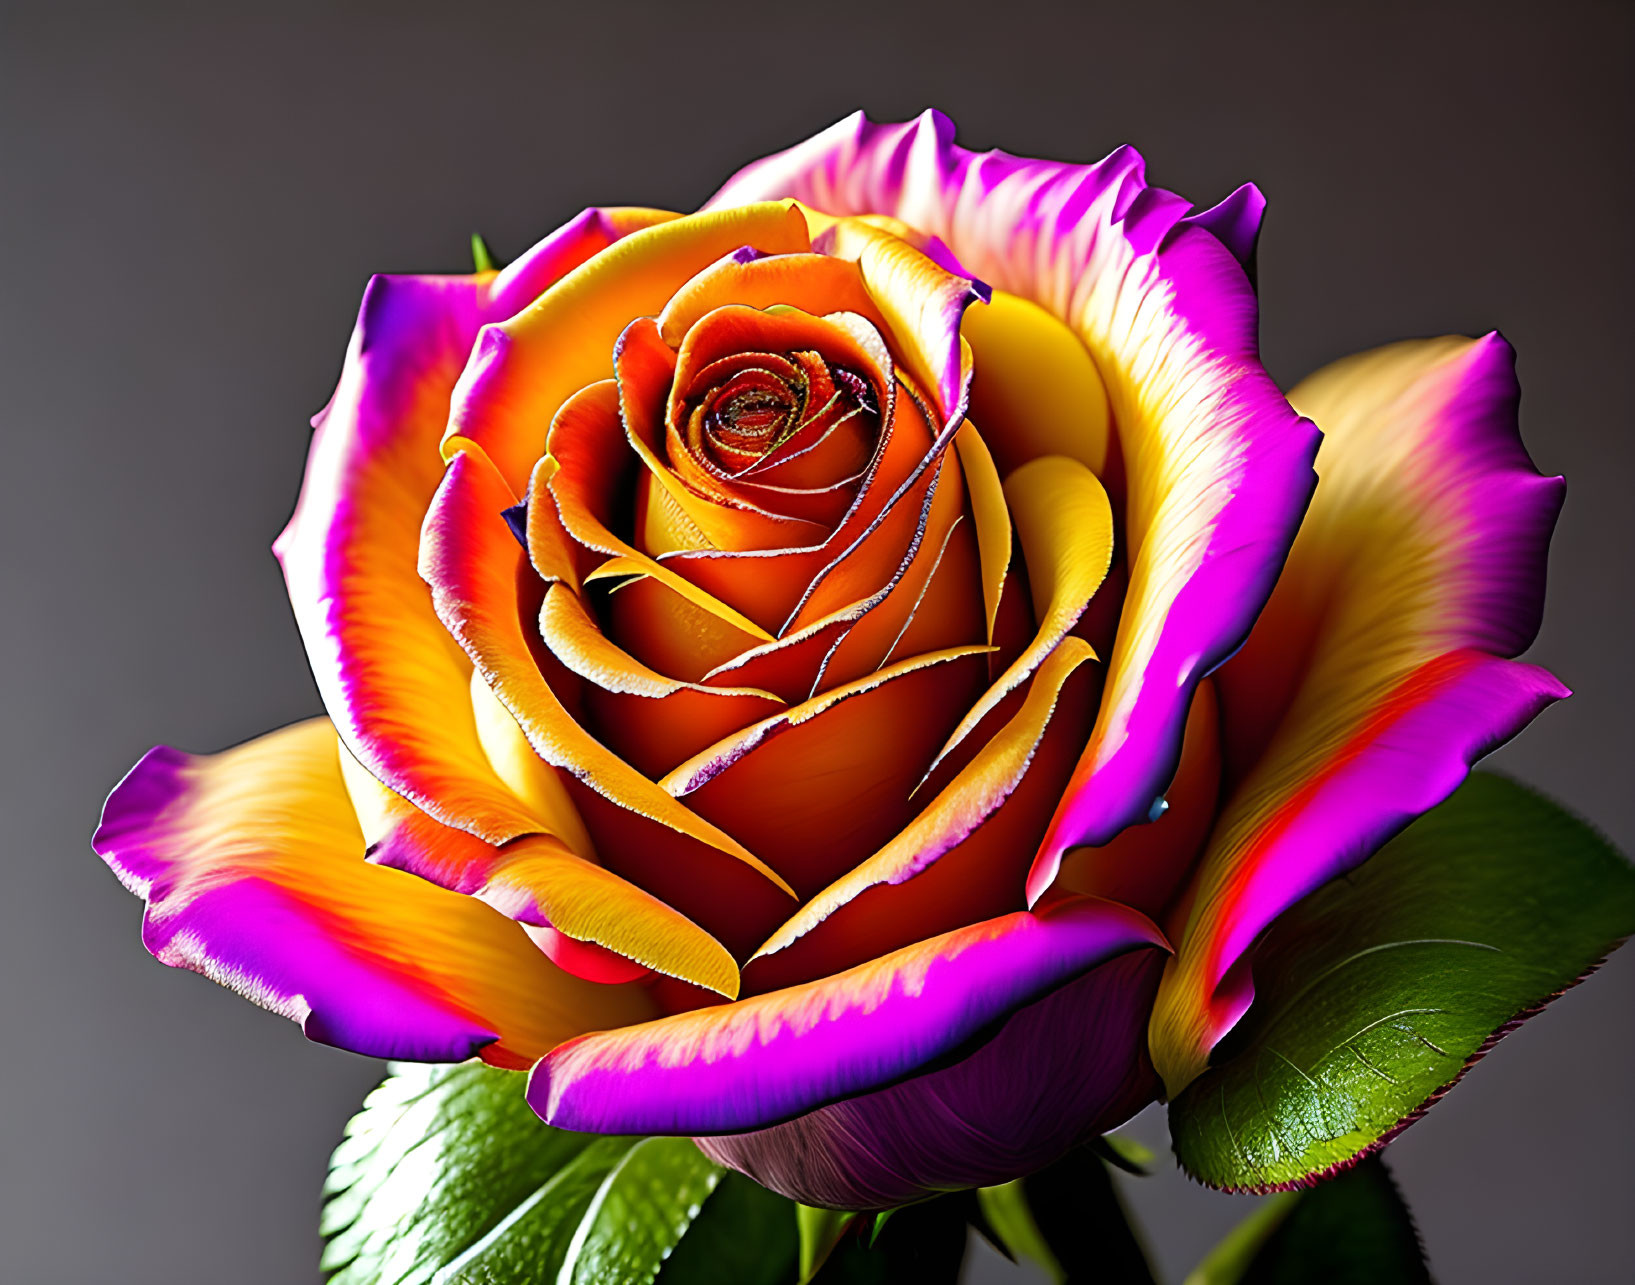 Vibrant multicolored rose with yellow, orange, and pink petals on grey background